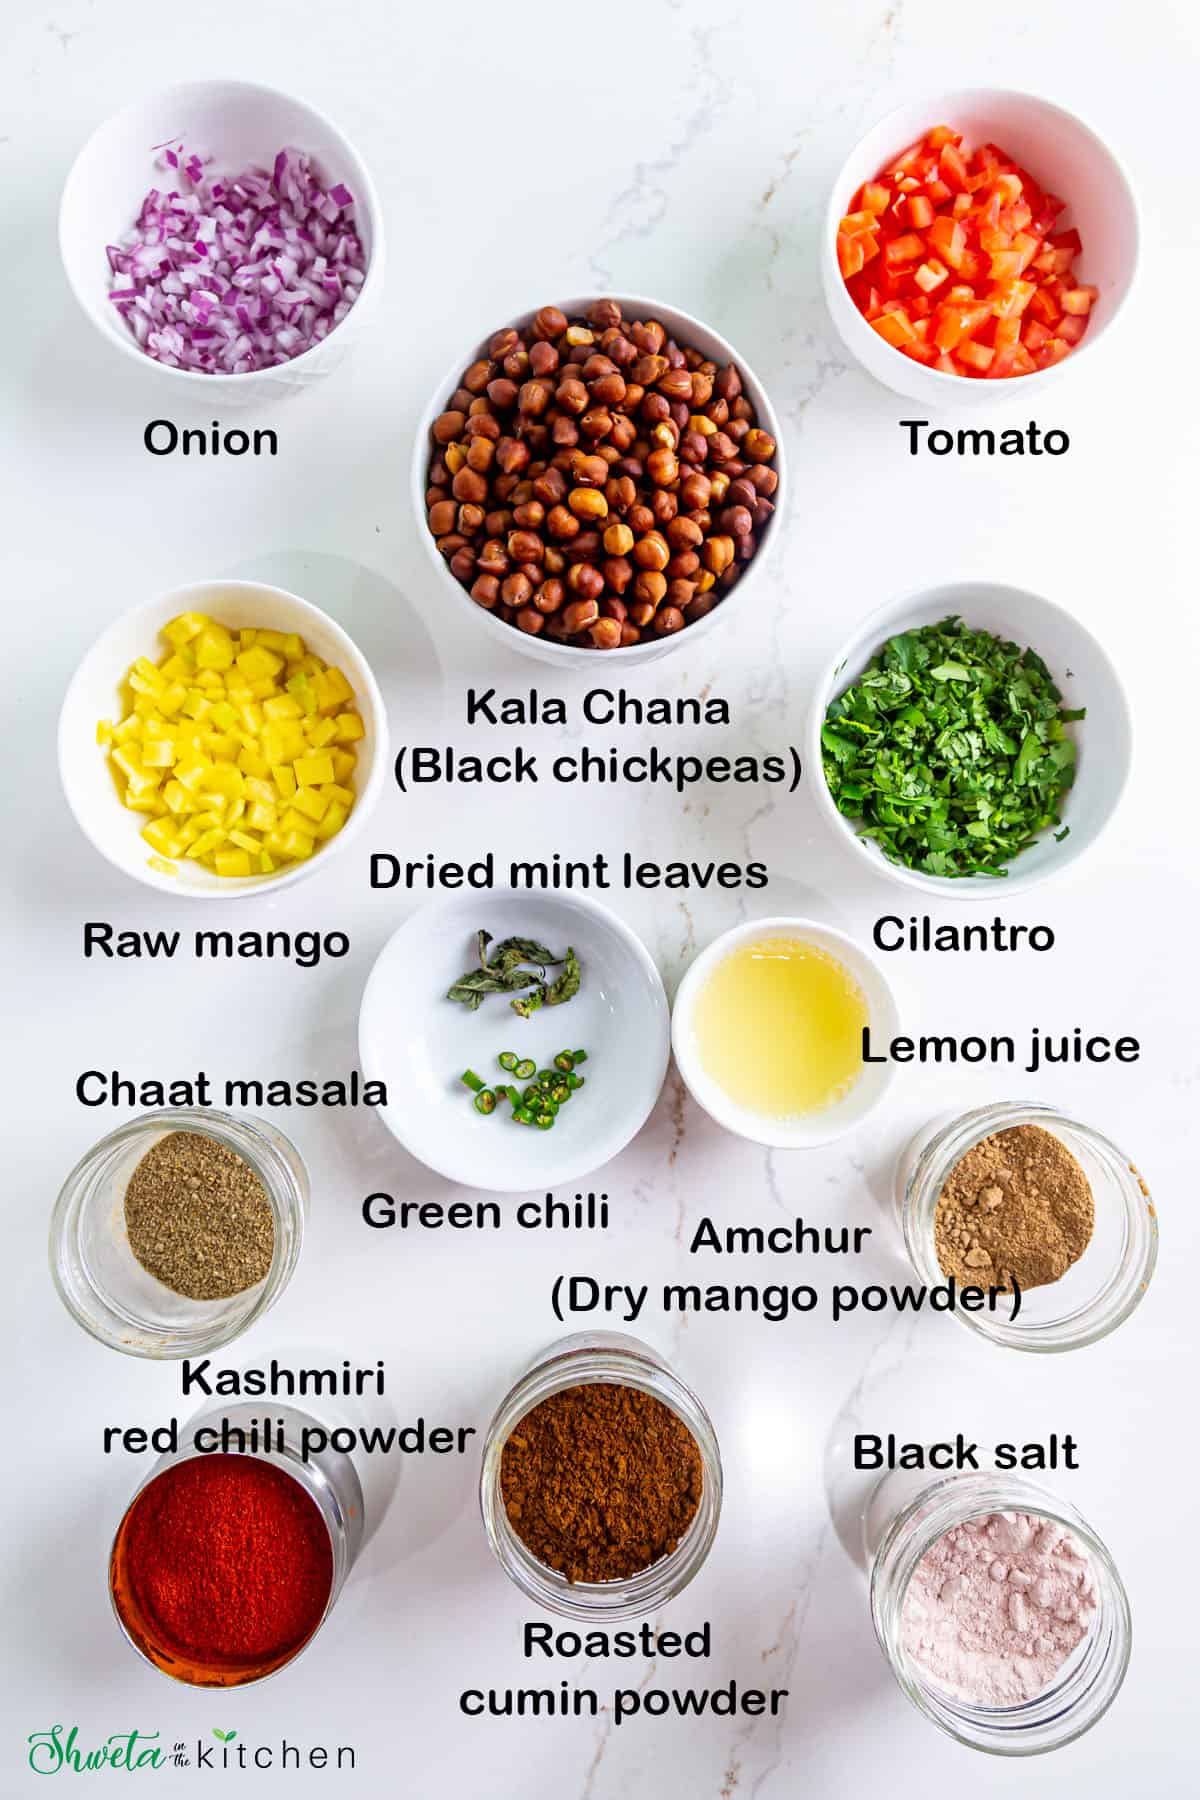 Ingredients for kala chana chaat (black chickpea salad) placed in bowls on white surface